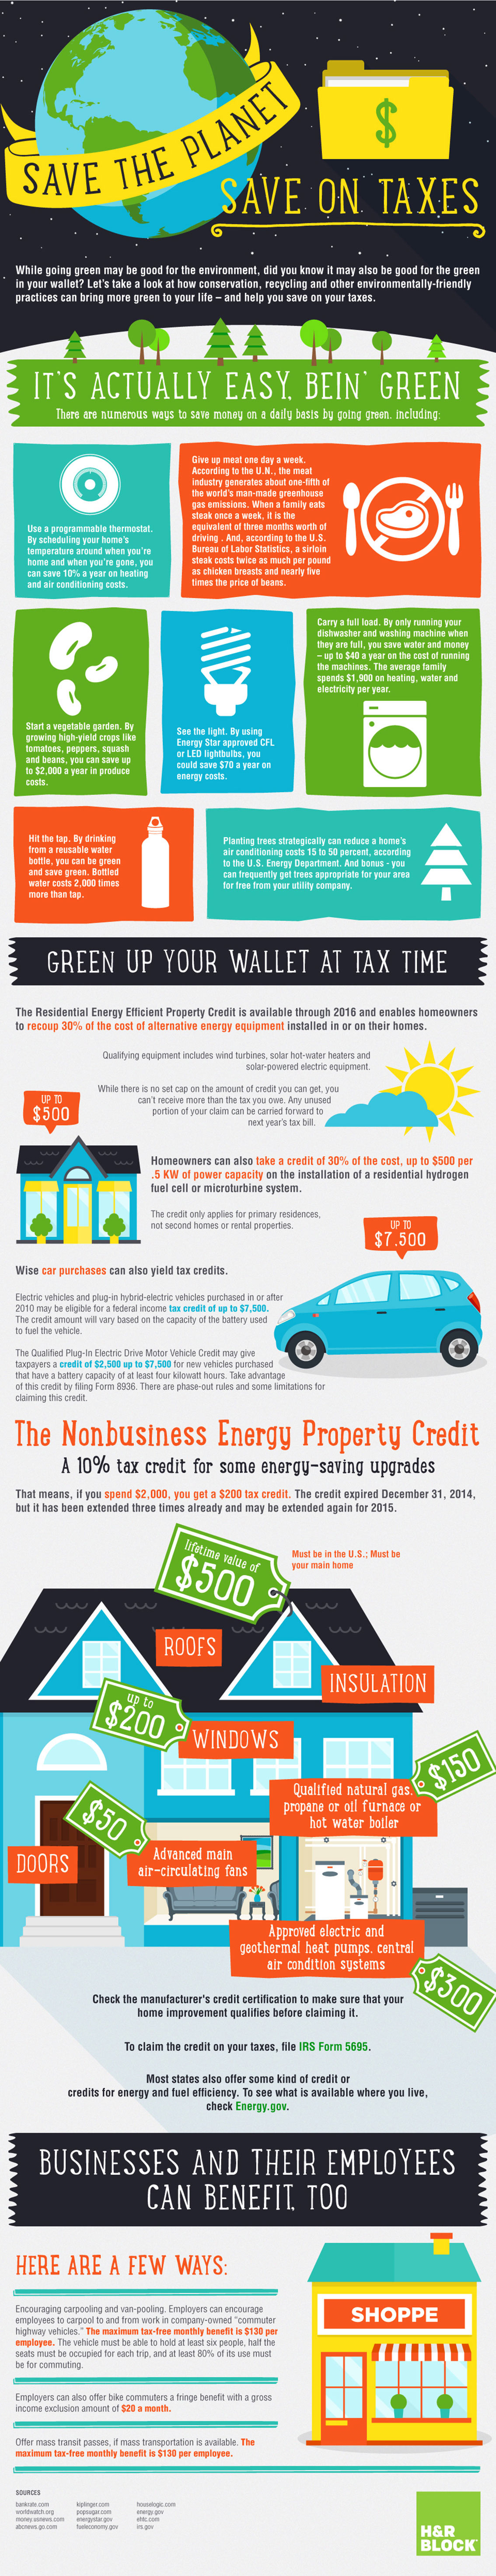 Earth Day - Save on Tax by Saving The Planet Infographic